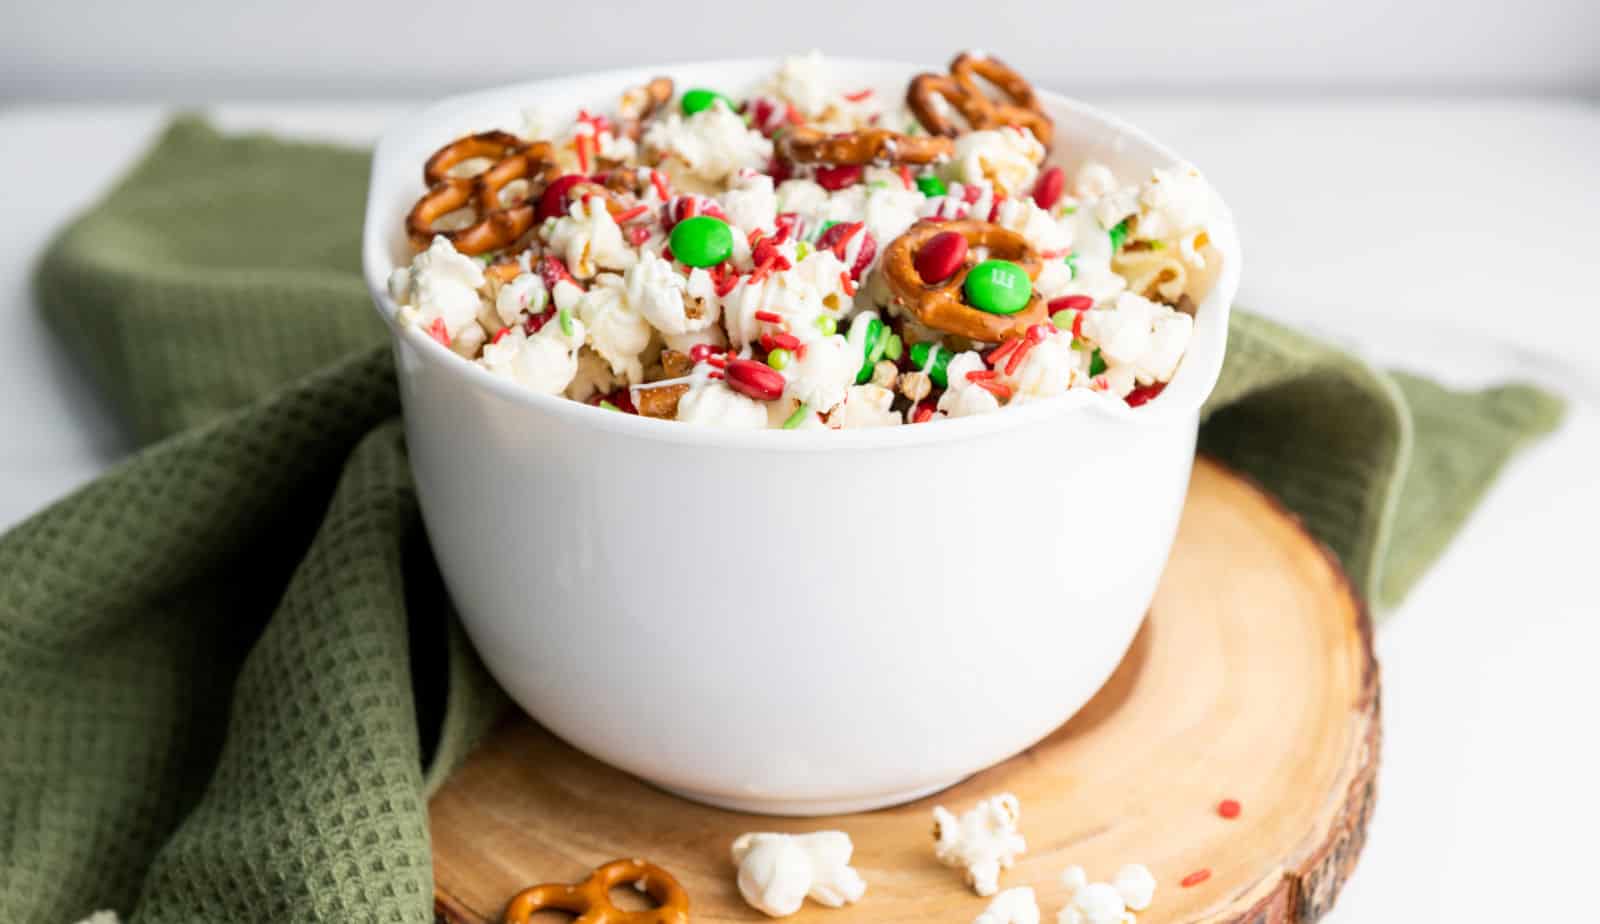 Christmas popcorn in a white bowl with pretzels.